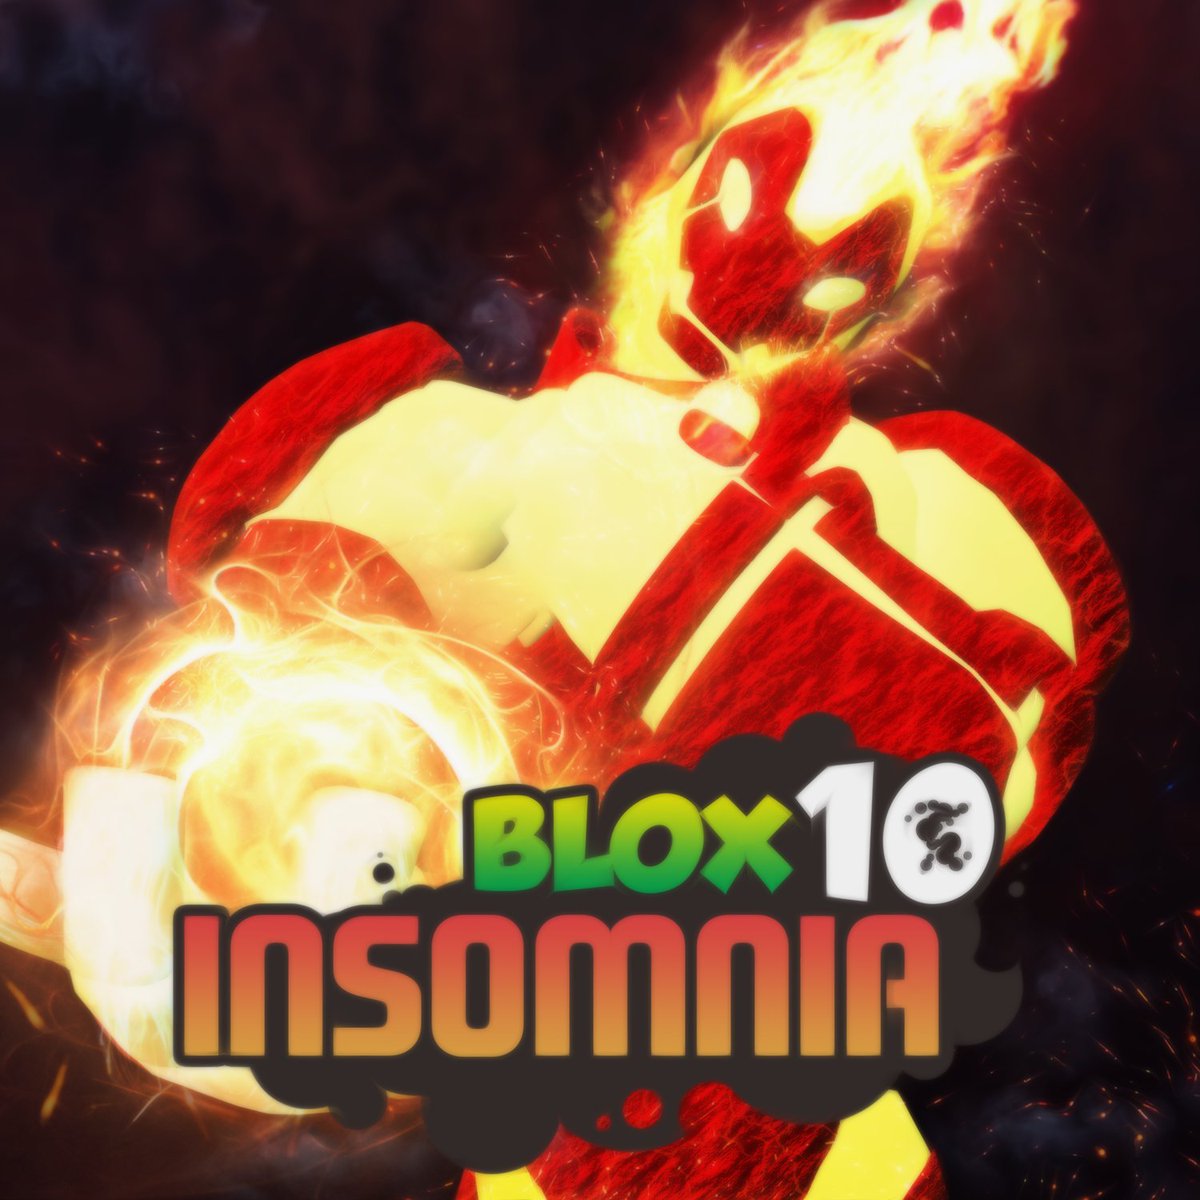 Codes For Blox Ten Insomnia In Roblox How To Get Free - roblox blox ten insomnia codes wiki free roblox promo